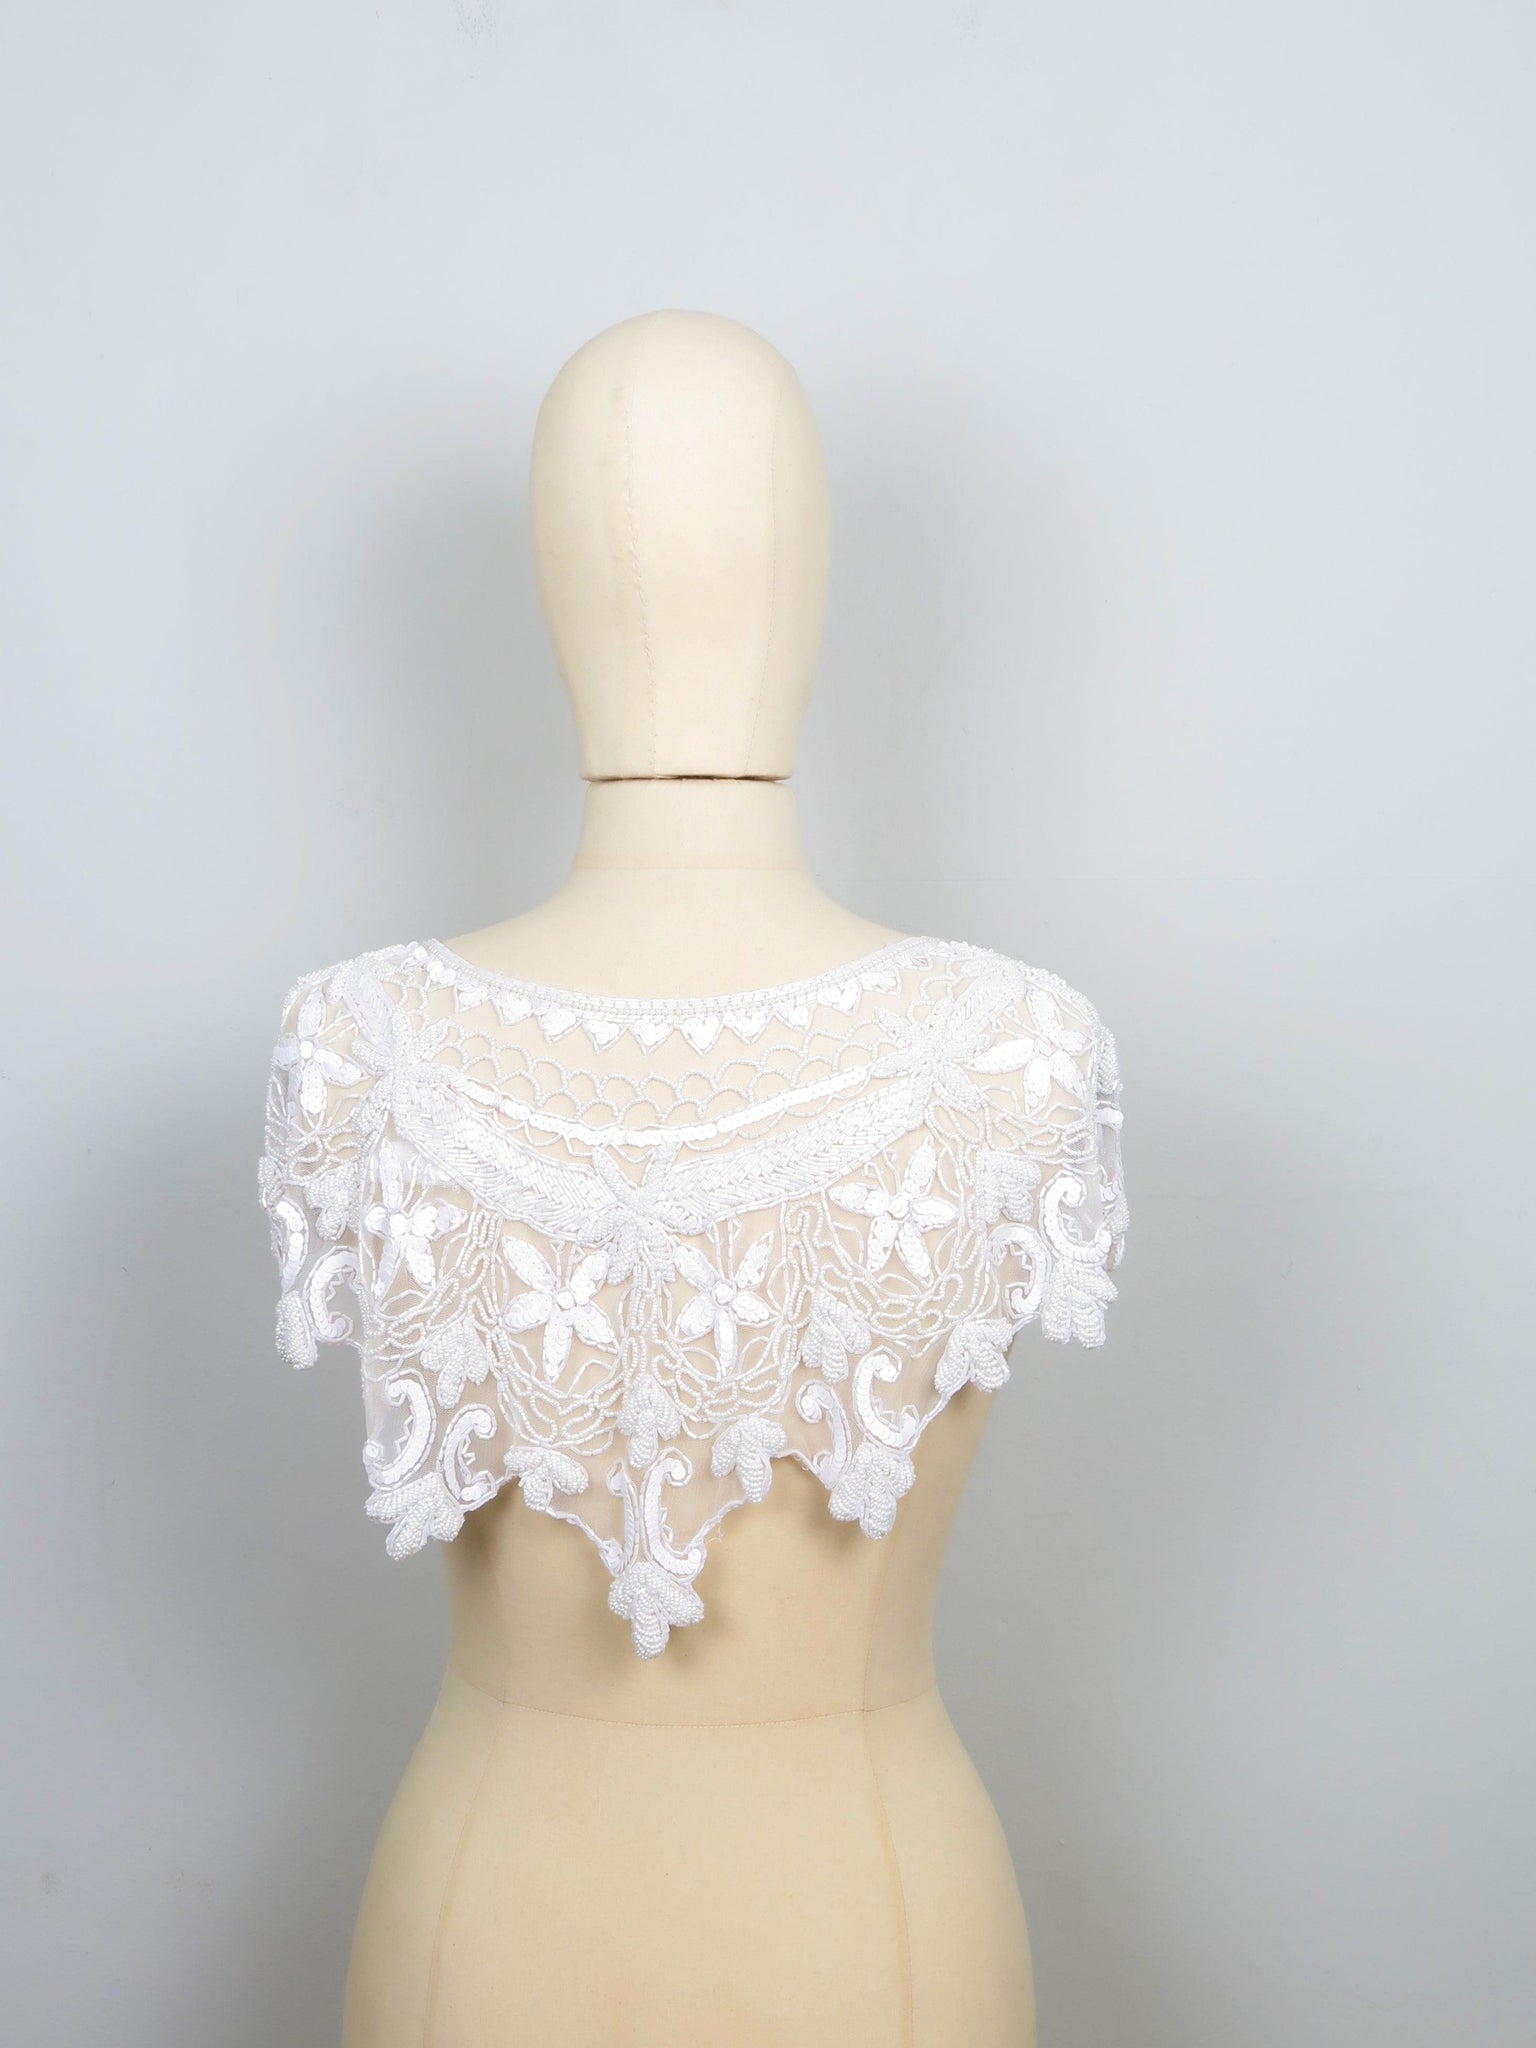 Beaded White Cape/Collar One Size New - The Harlequin